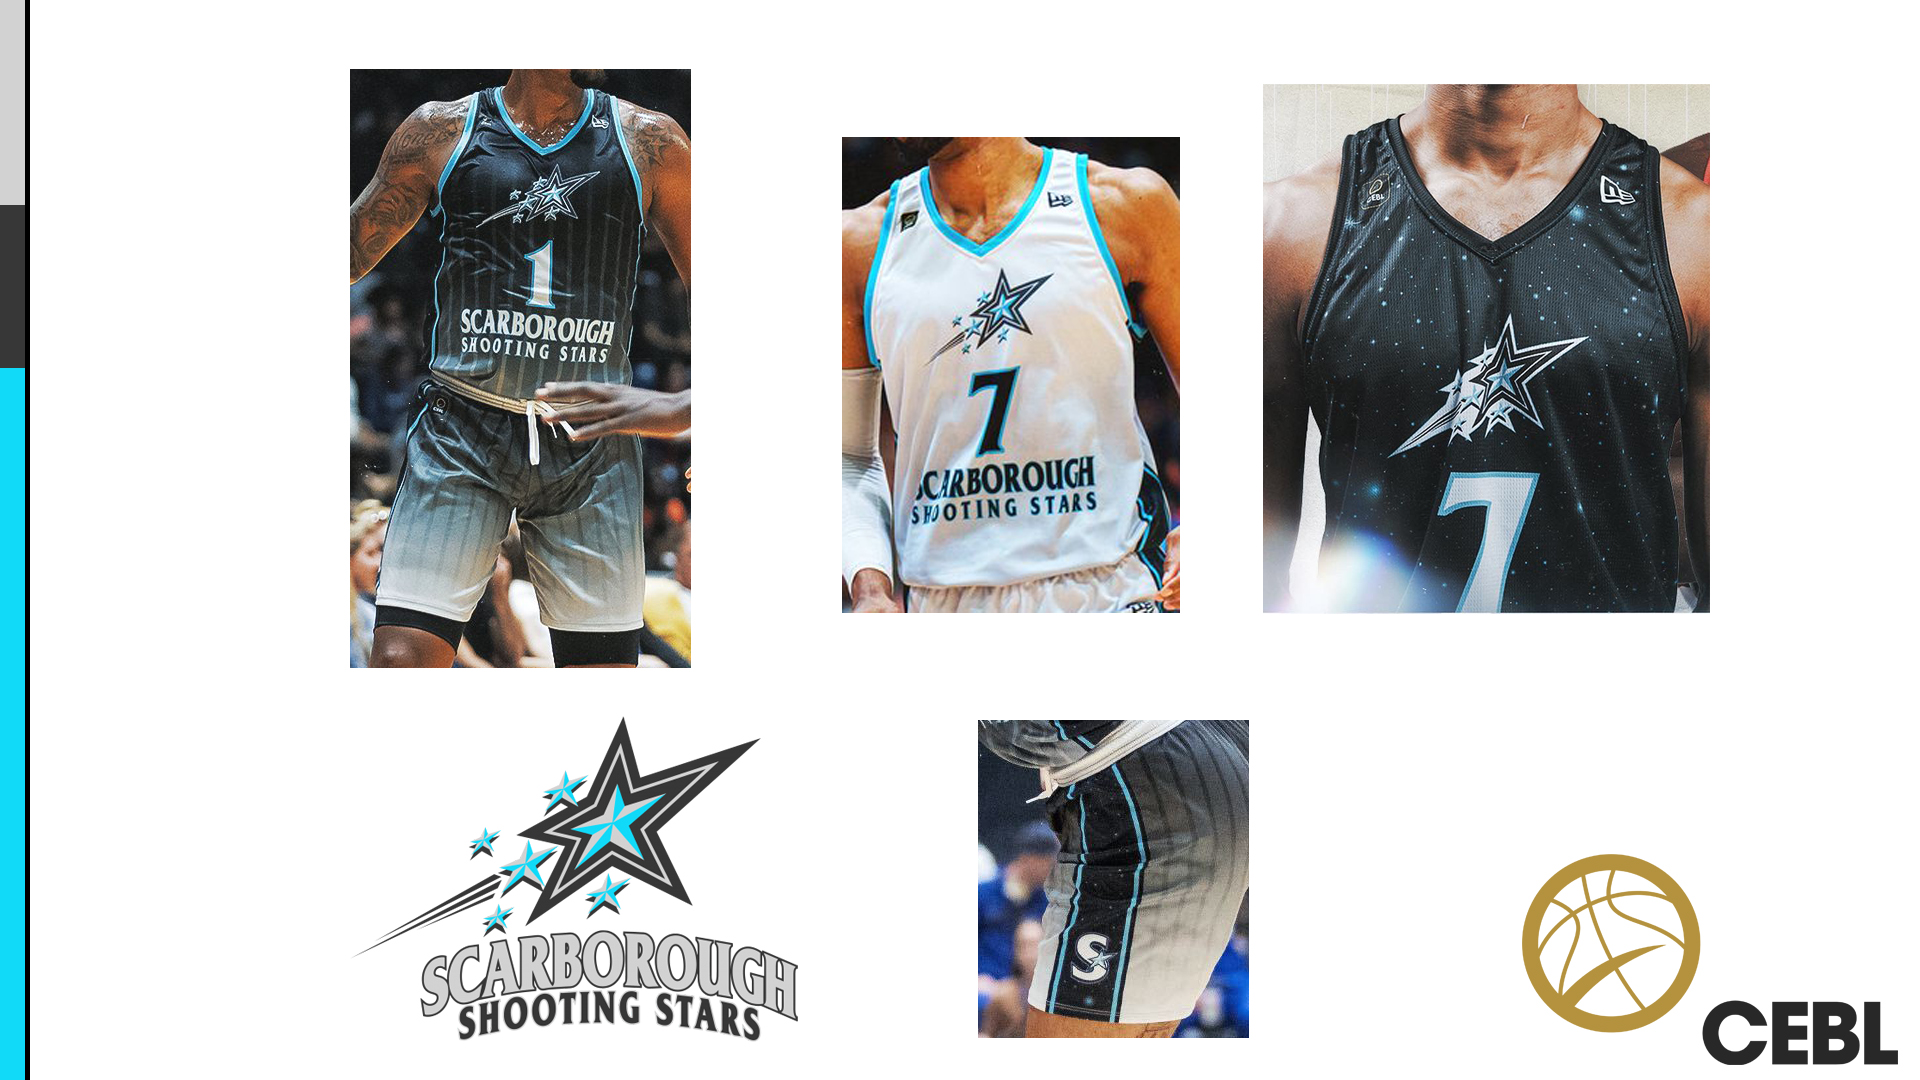 CEBL 2022 Sartorial Rankings - Picking a Favourite, Based on Jerseys and Logos